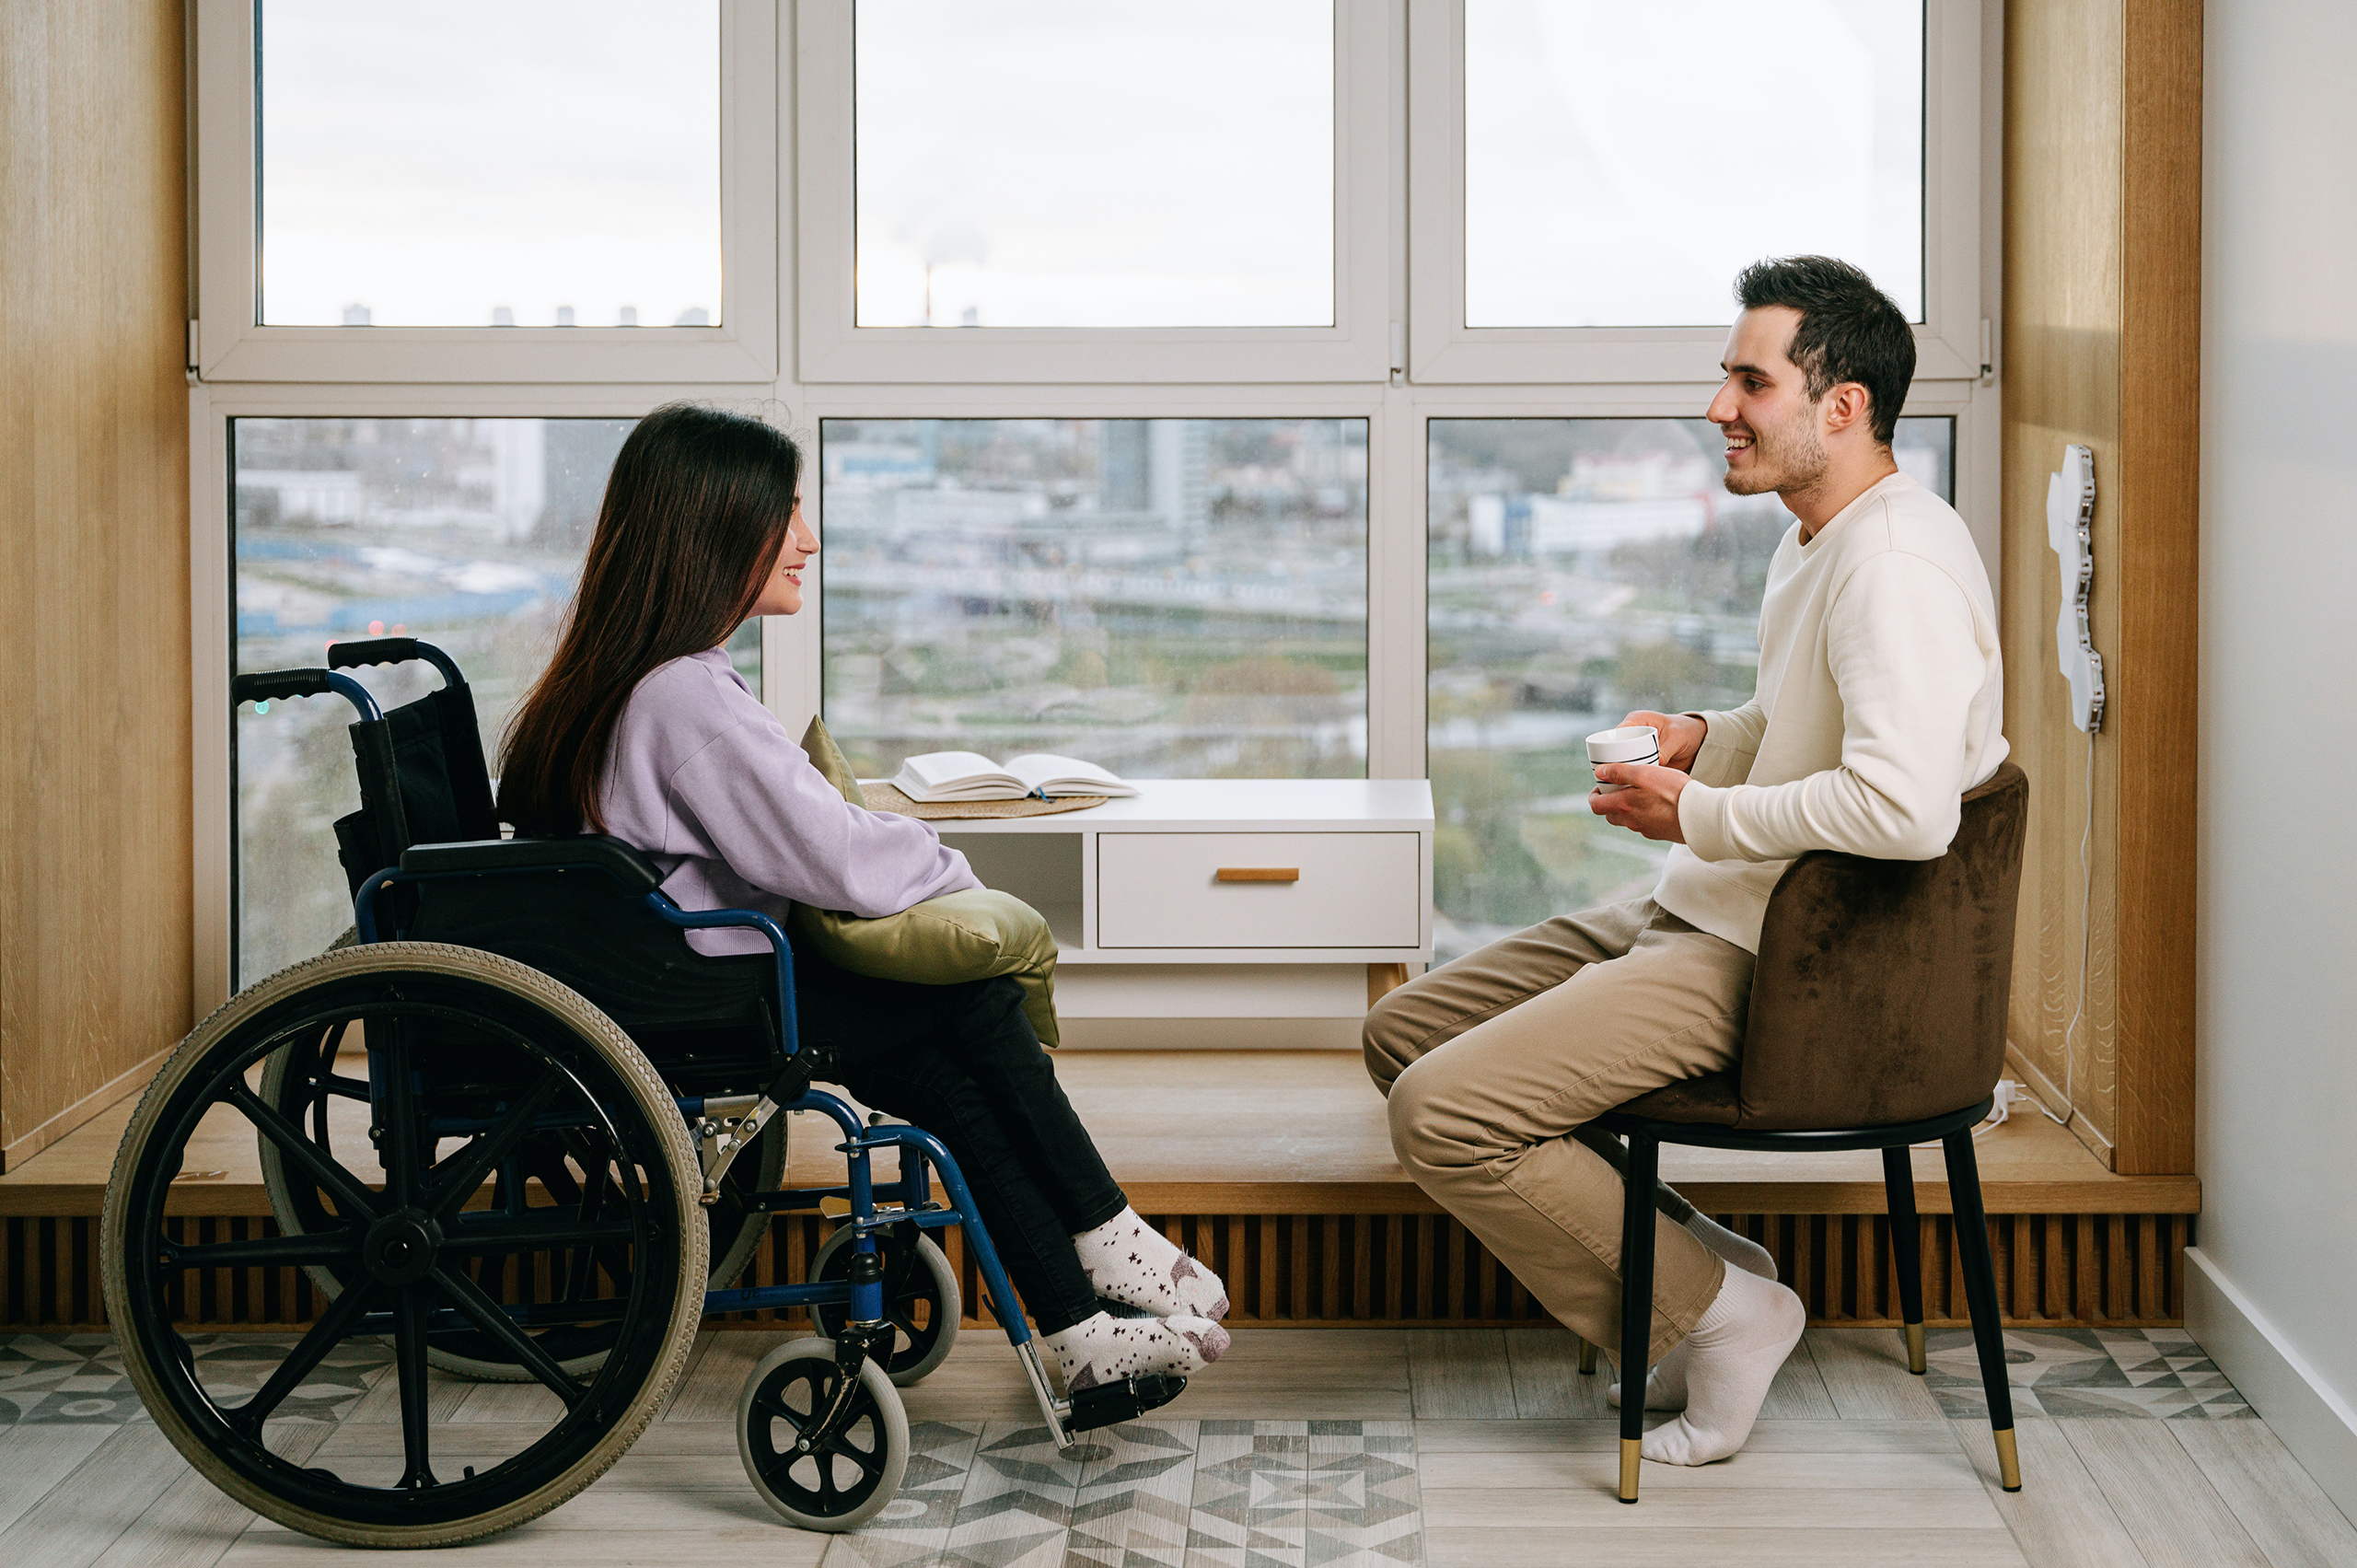 A woman in a wheelchair and a man in a chair have a conversation next to a window